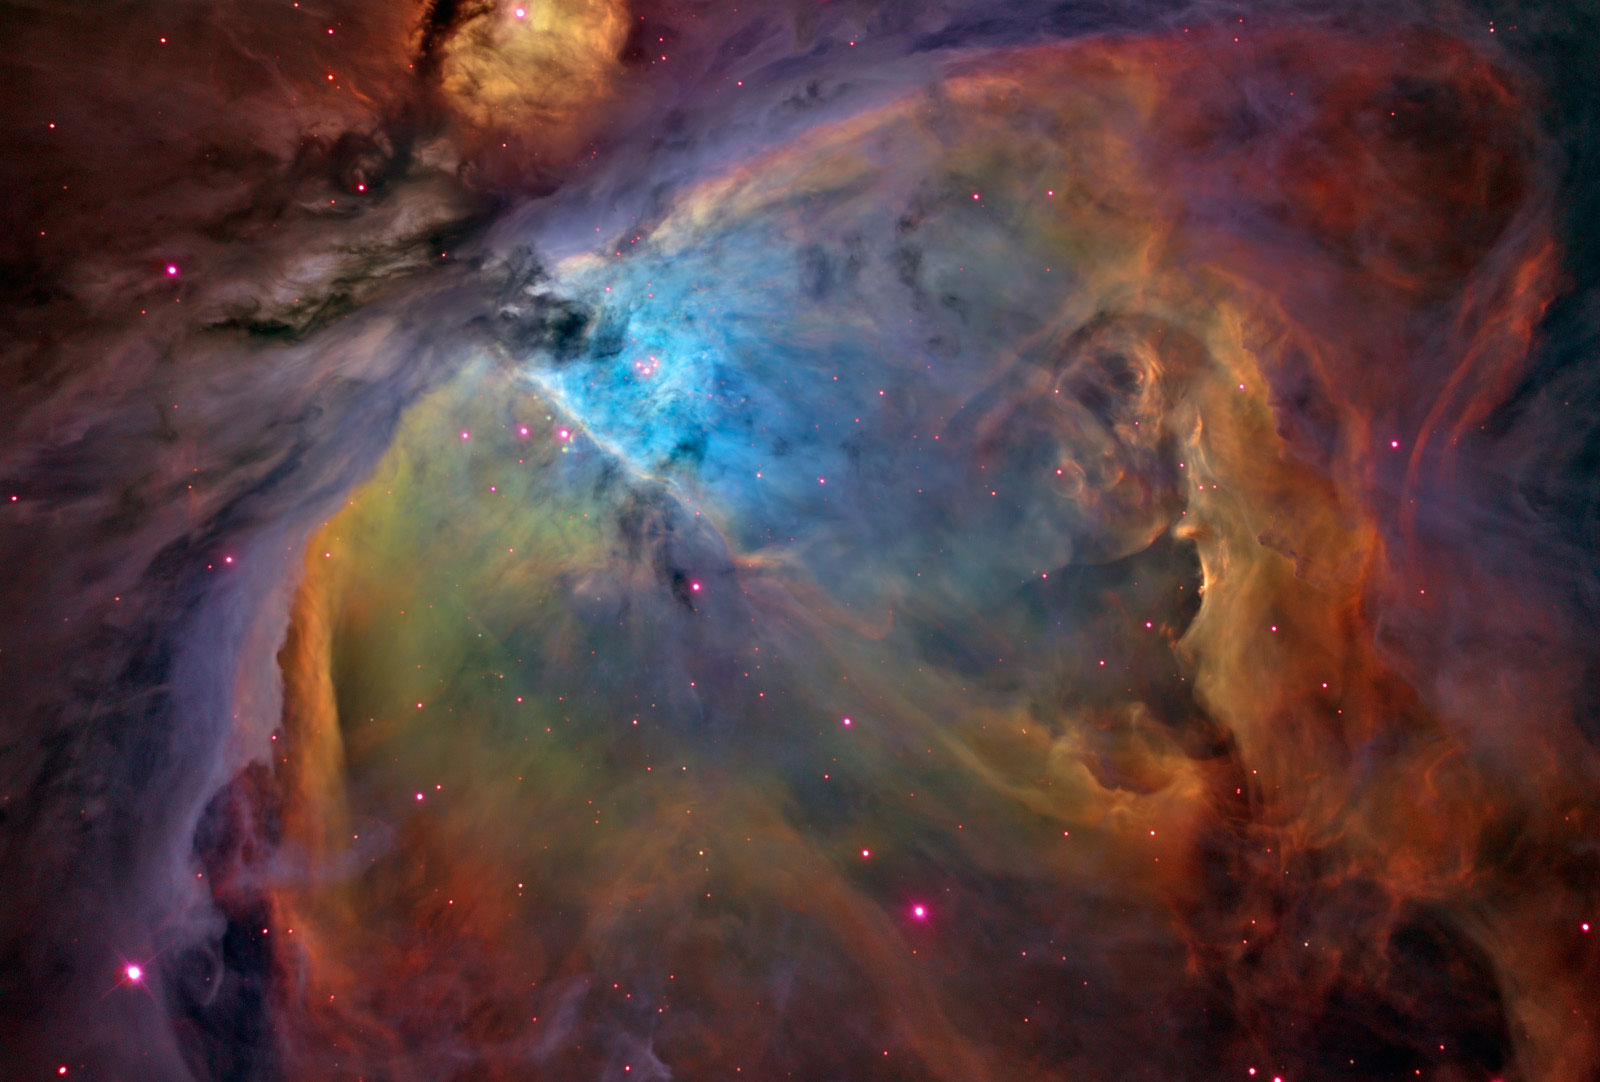 Orion Nebula Wallpaper 2853 Hd Wallpapers in Space   Imagescicom